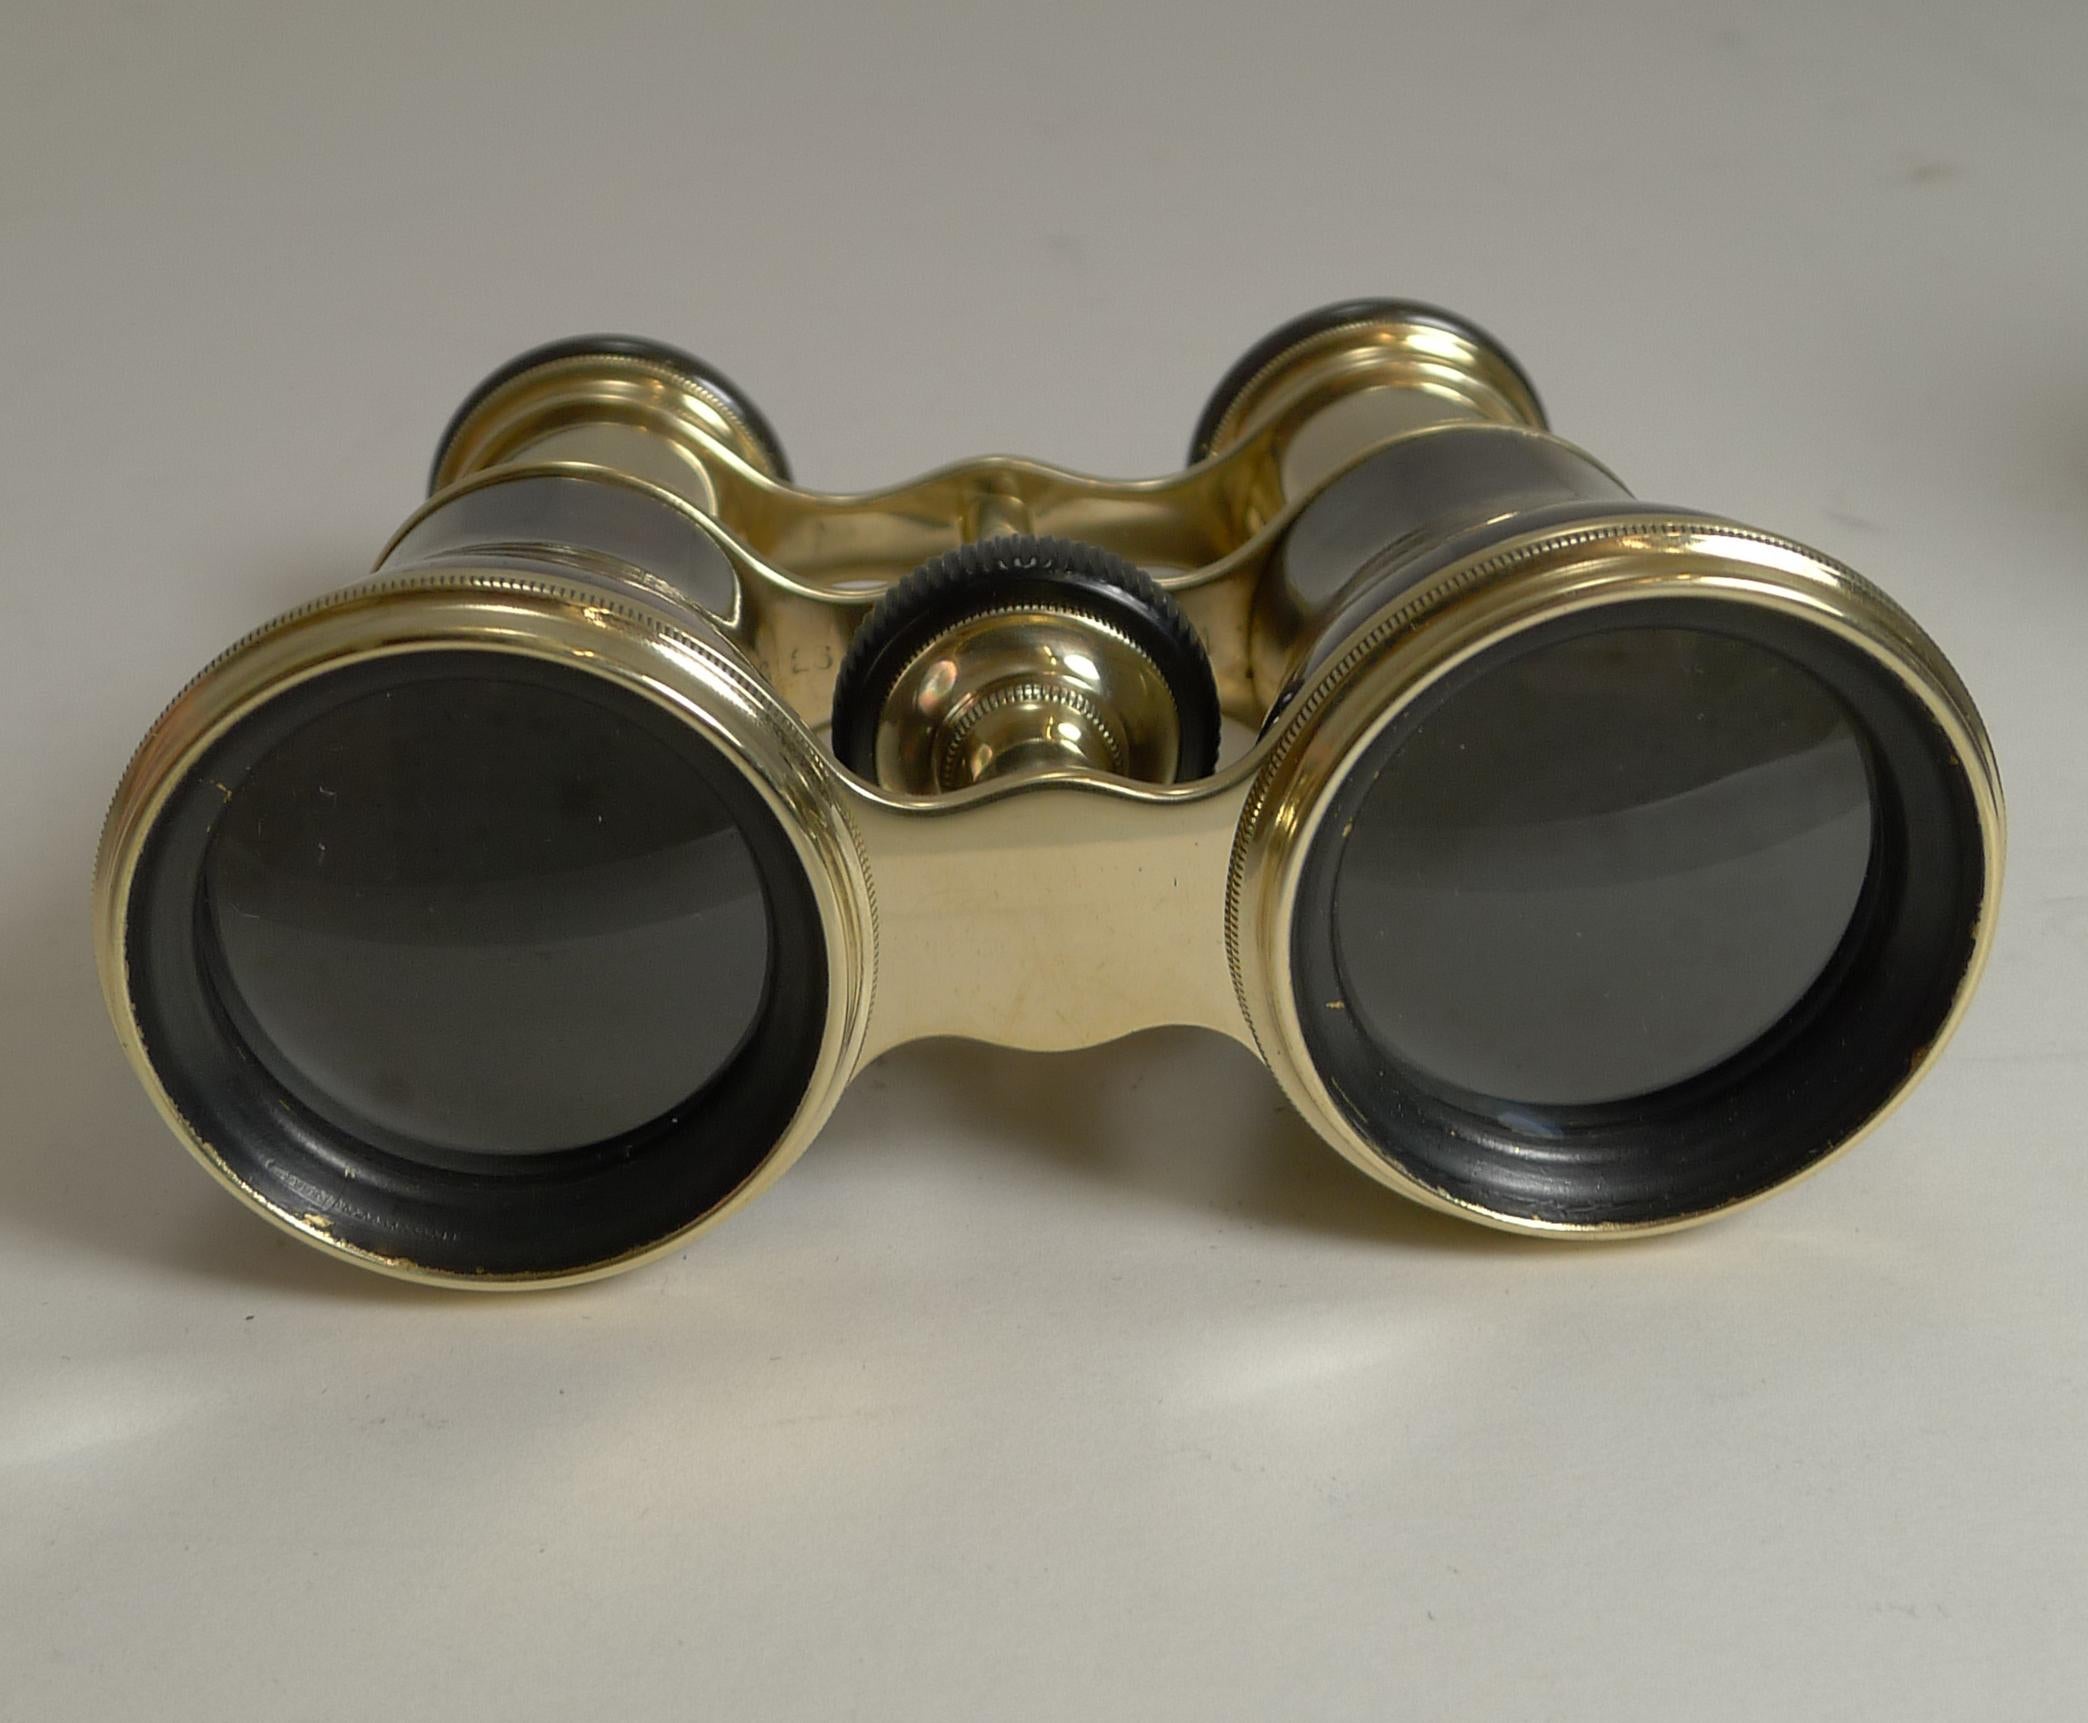 Early 20th Century A truly exquisite pair of Opera Glasses by the top-notch maker, LeMaire of Paris